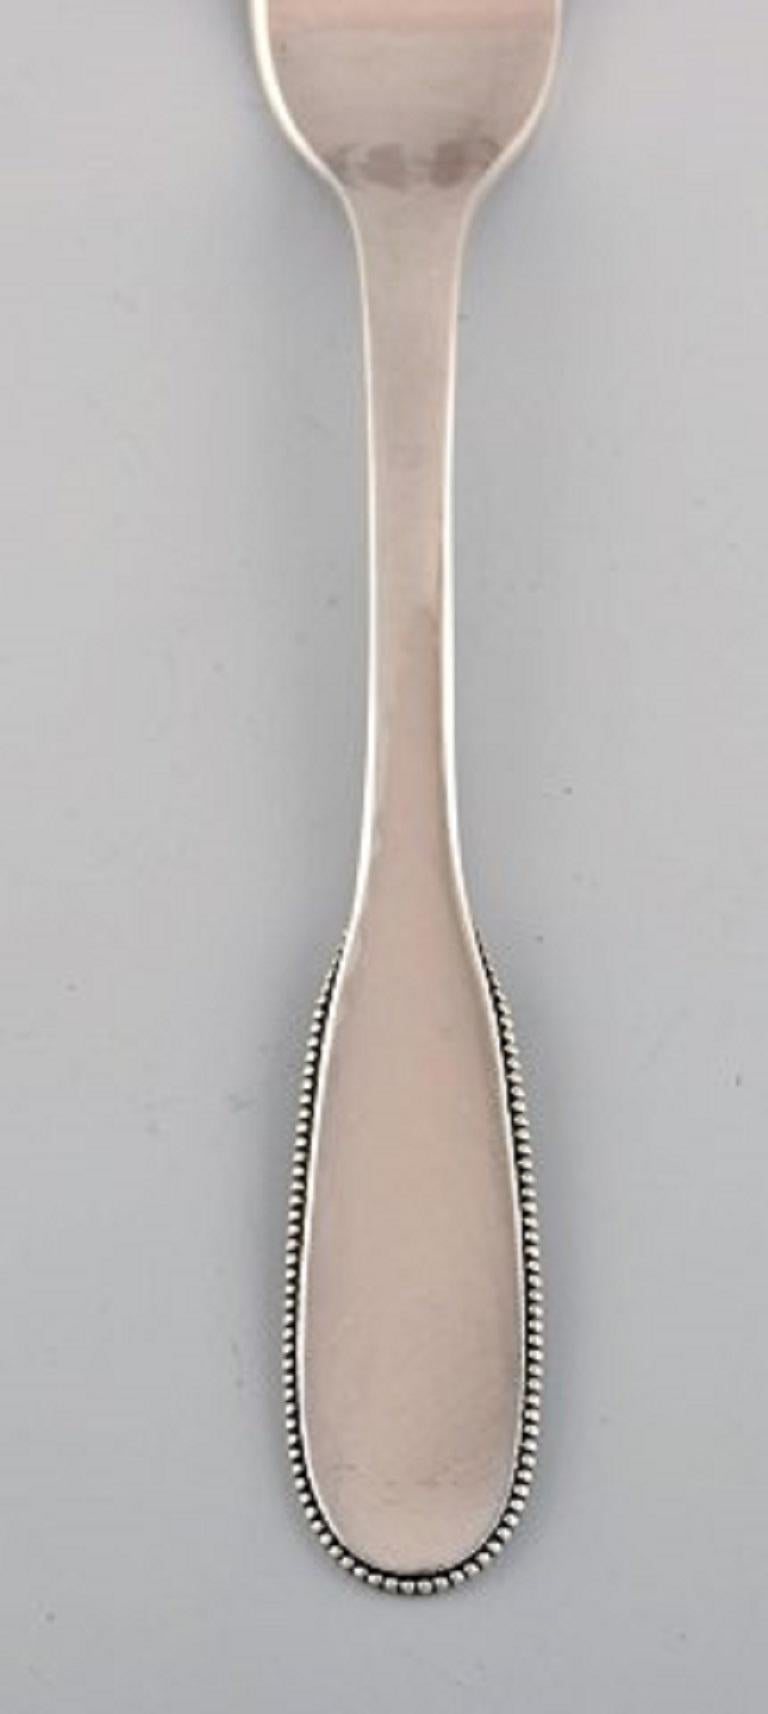 Evald Nielsen number 14 lunch fork in hammered silver, 1920s.
3 forks available.
Measure: Length: 17.7 cm.
Stamped.
In excellent condition.
Our skilled Georg Jensen silversmith / goldsmith can polish all silver and gold so that it looks like